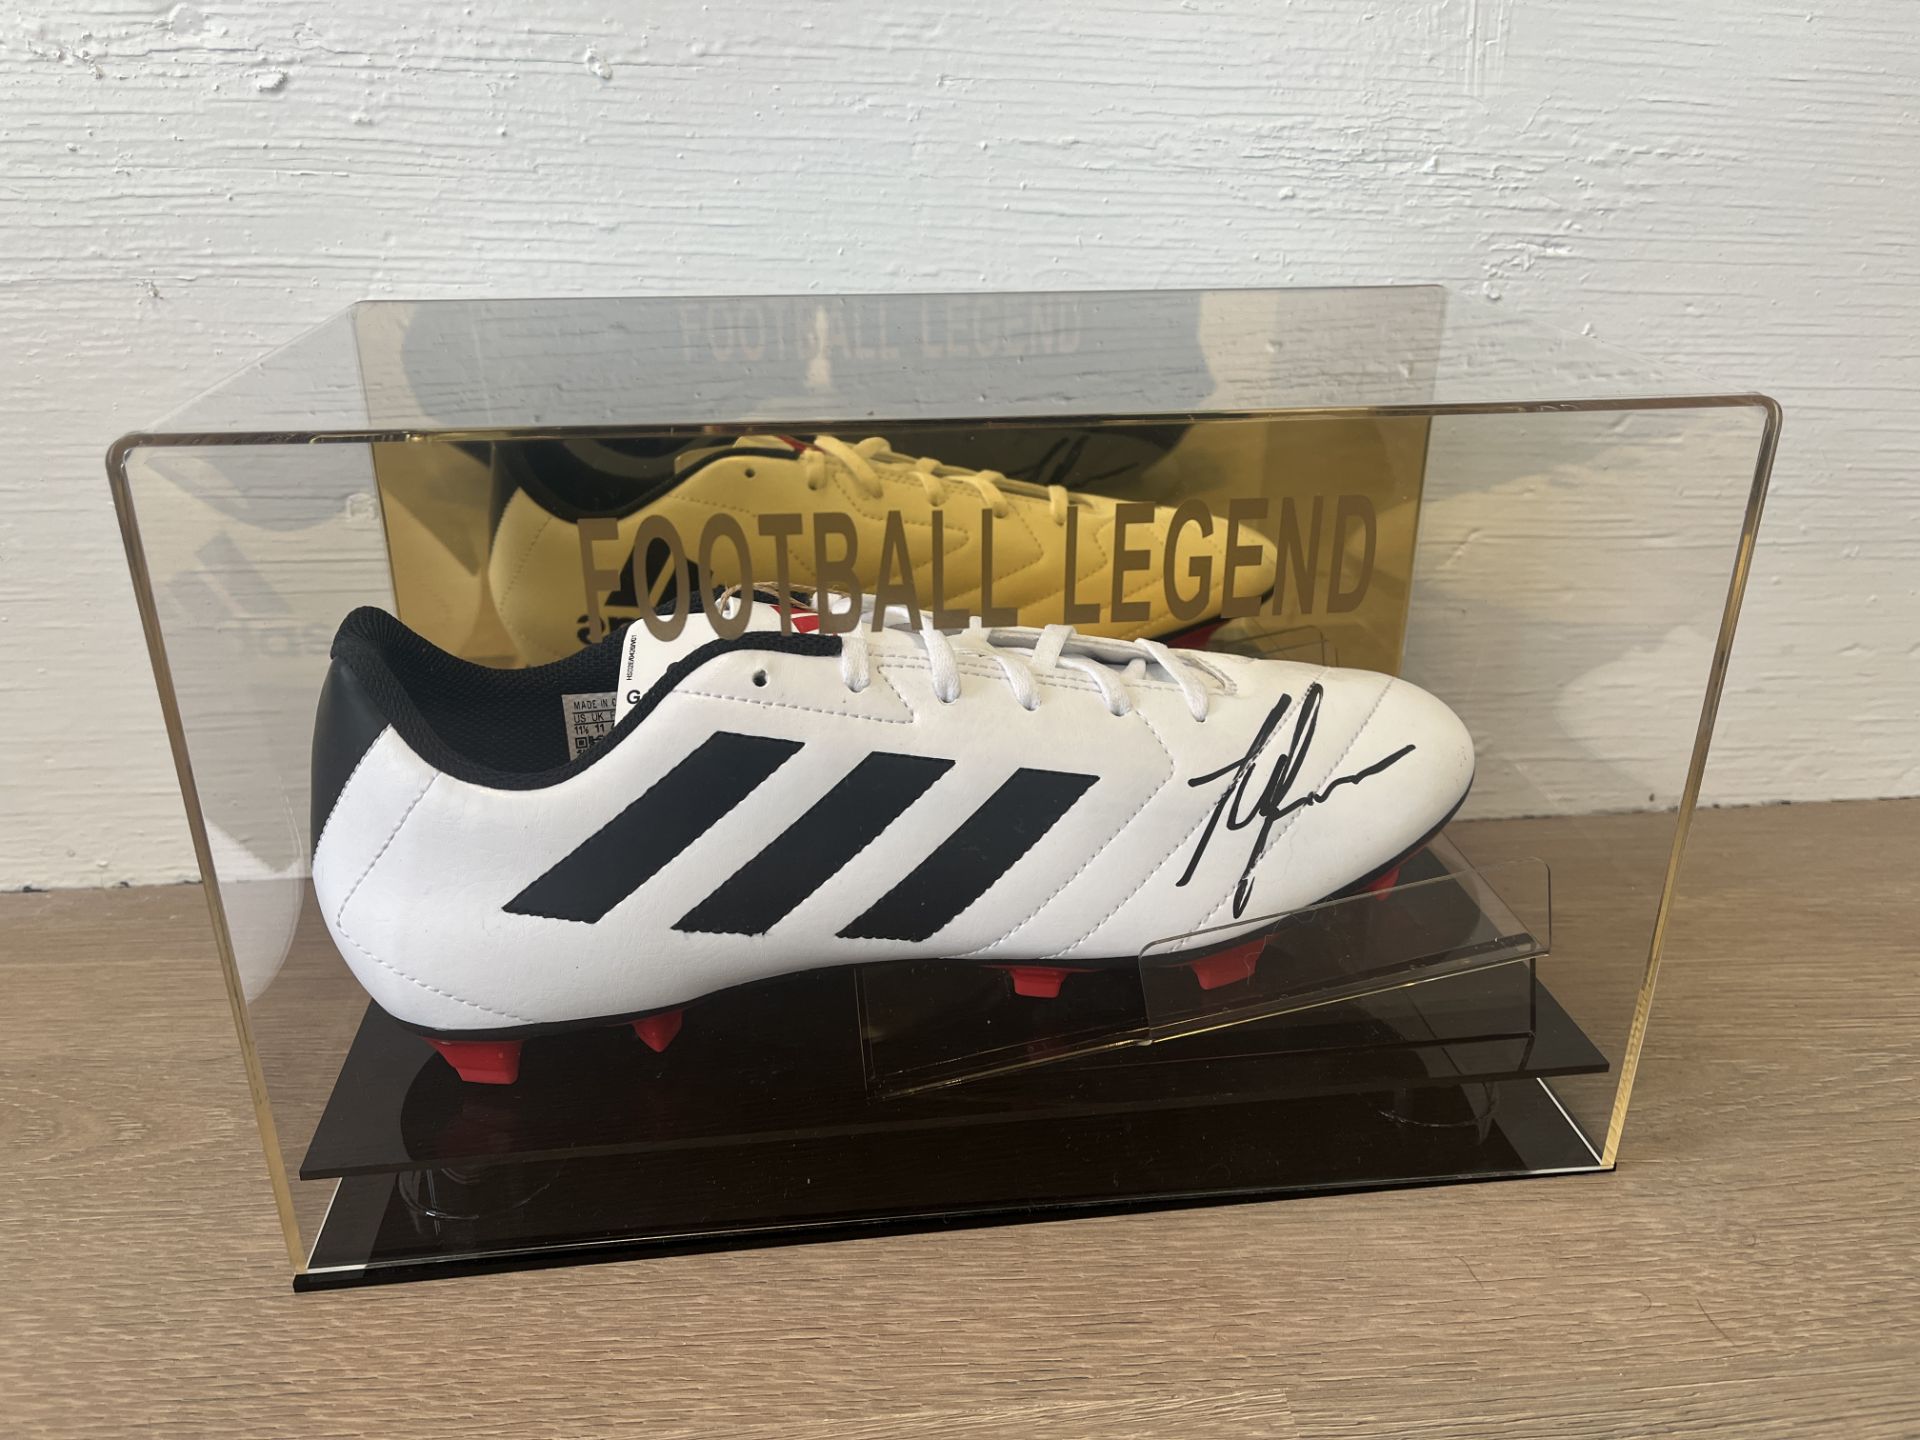 FRAMED & SIGNED FOOTBALL BOOT BY FOOTBALLING LEGEND ALAN SHEARER COMES WITH CERTIFICATE OF